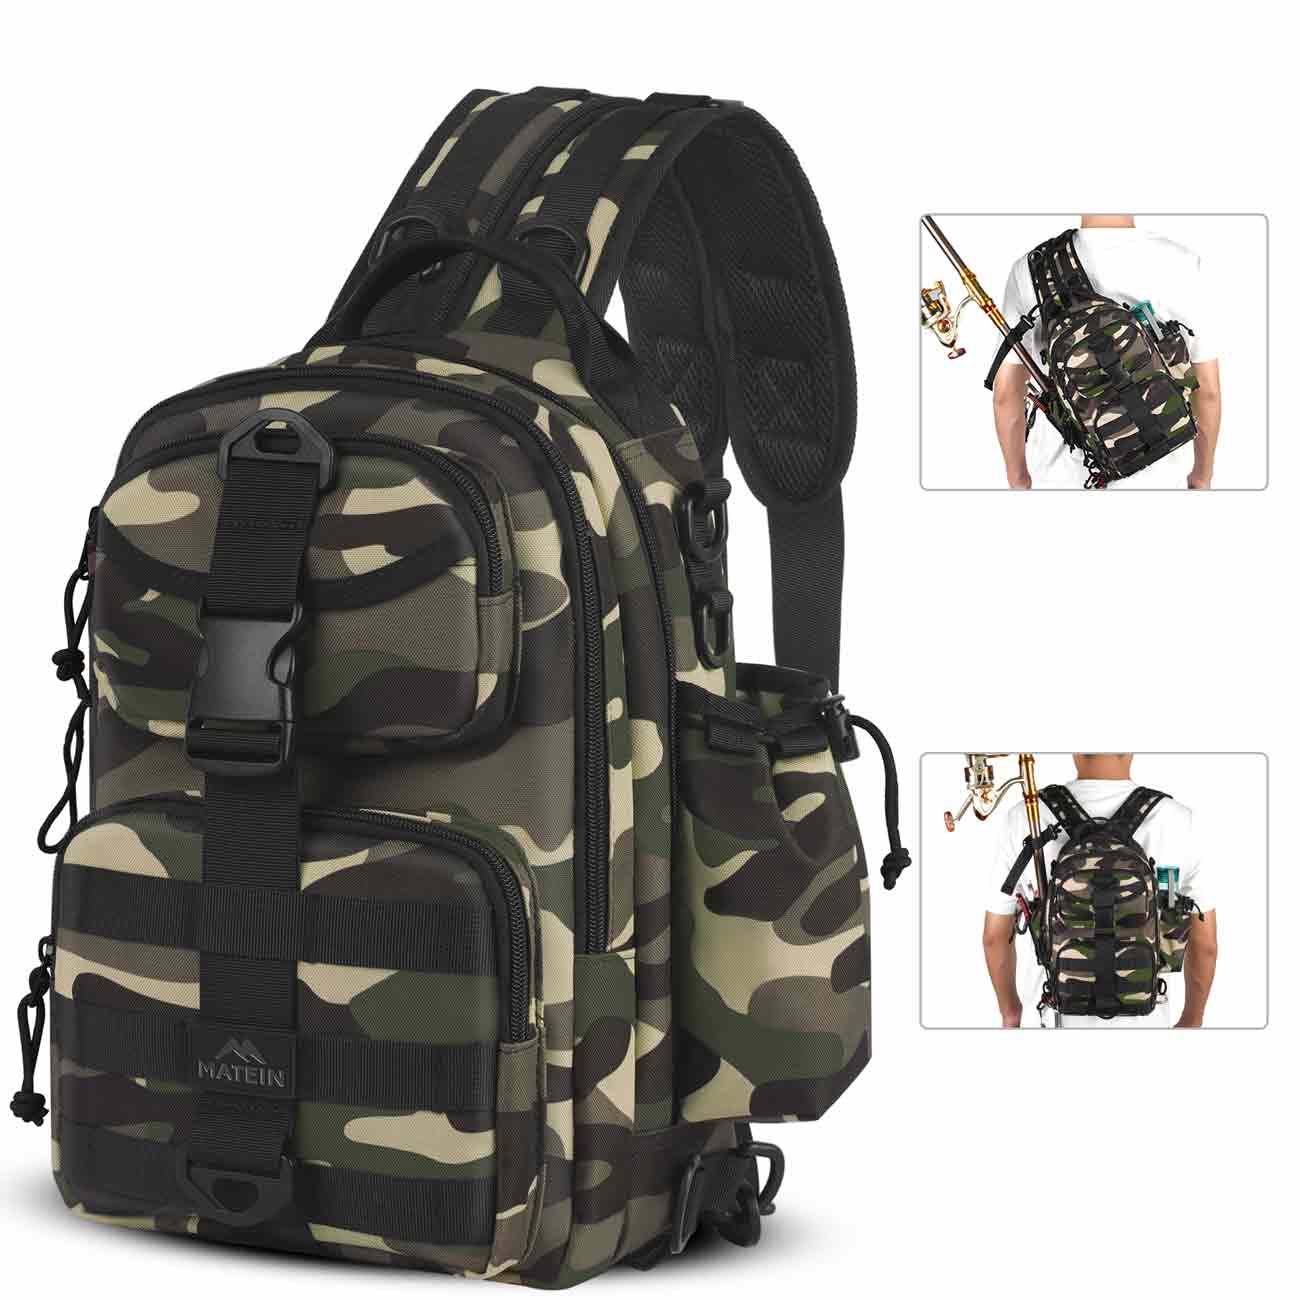 Fishing Tackle Backpack with Cooler, MATEIN Large Fishing Bag with